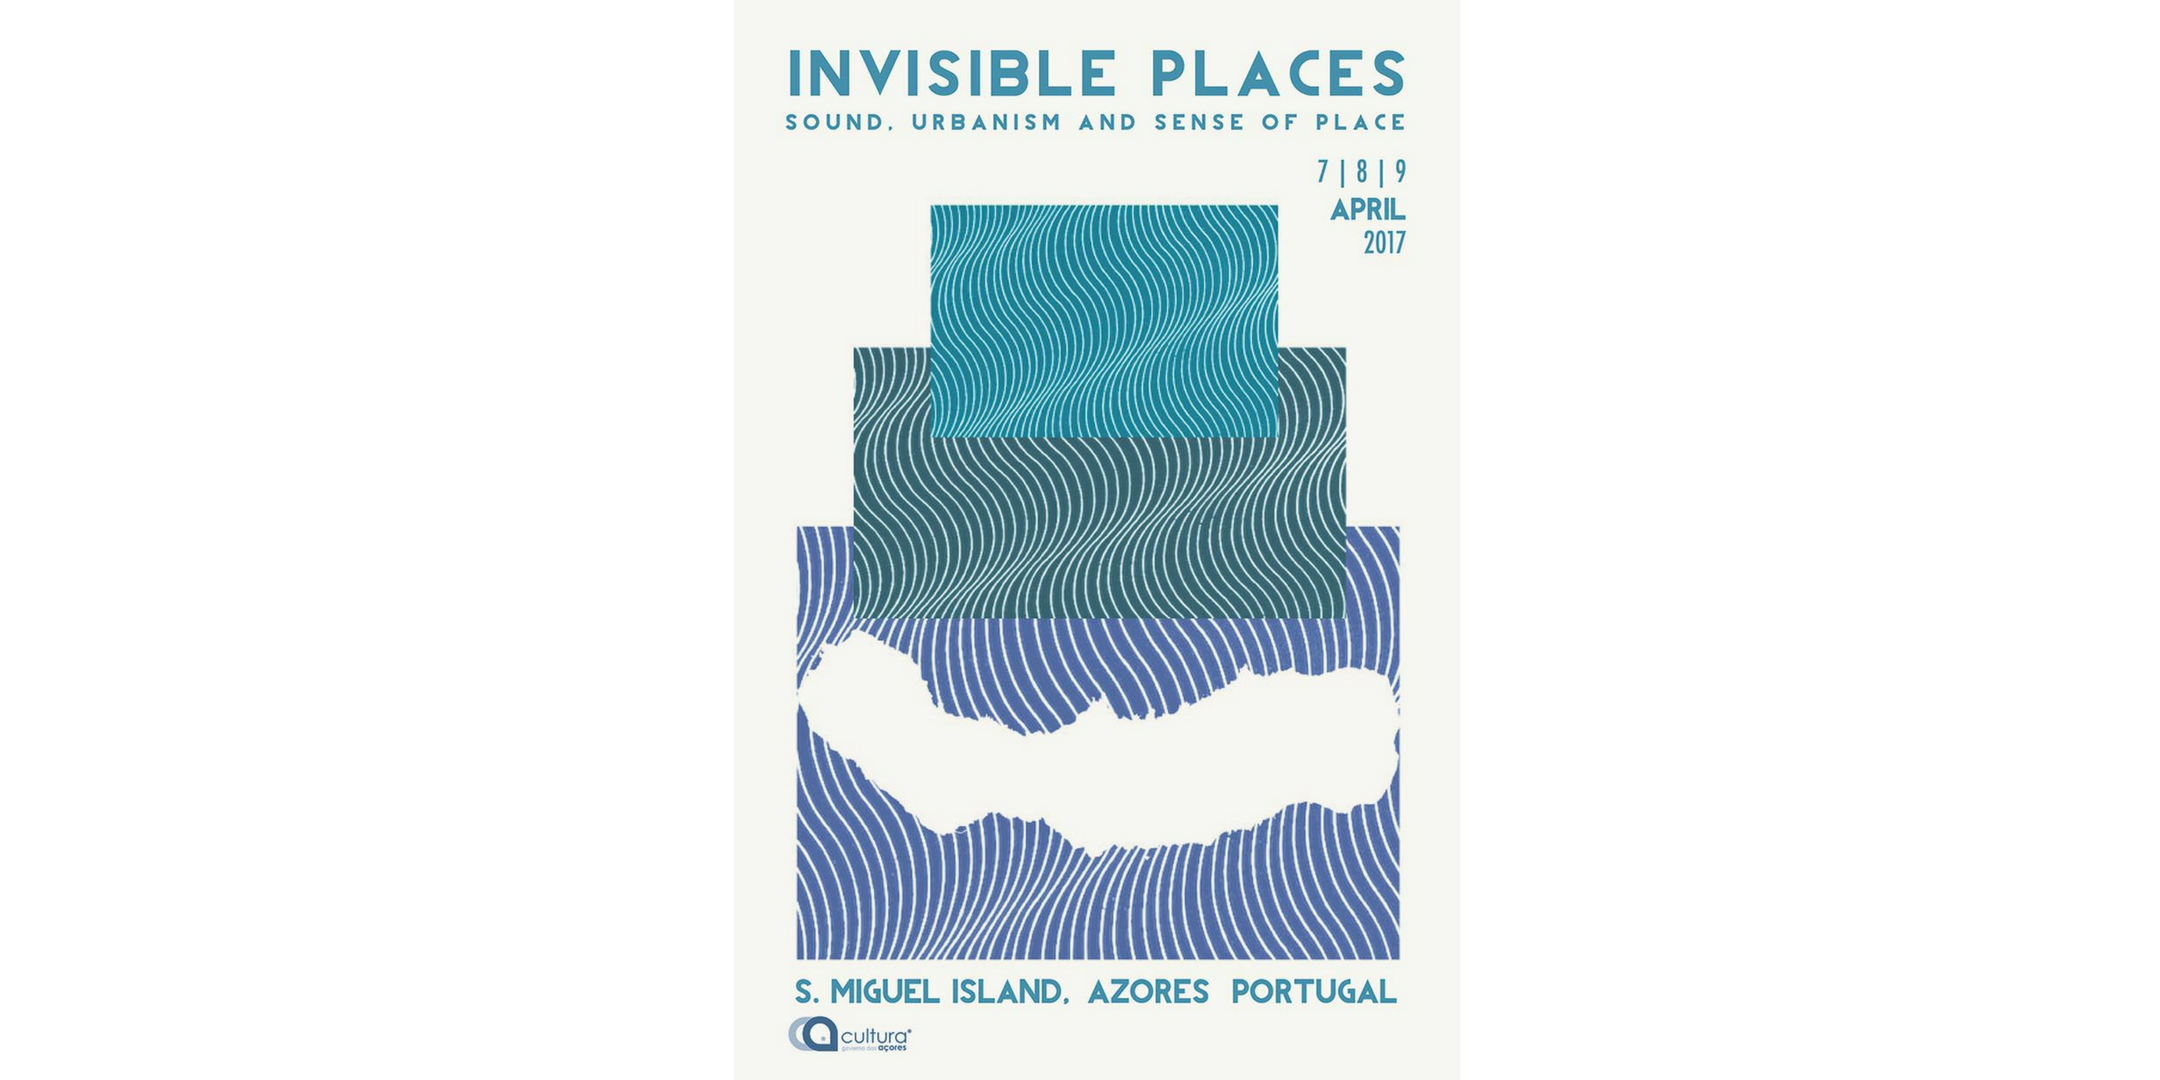 Soundwalk Workshop, Engaging Urban Communities at Invisible Places 2017